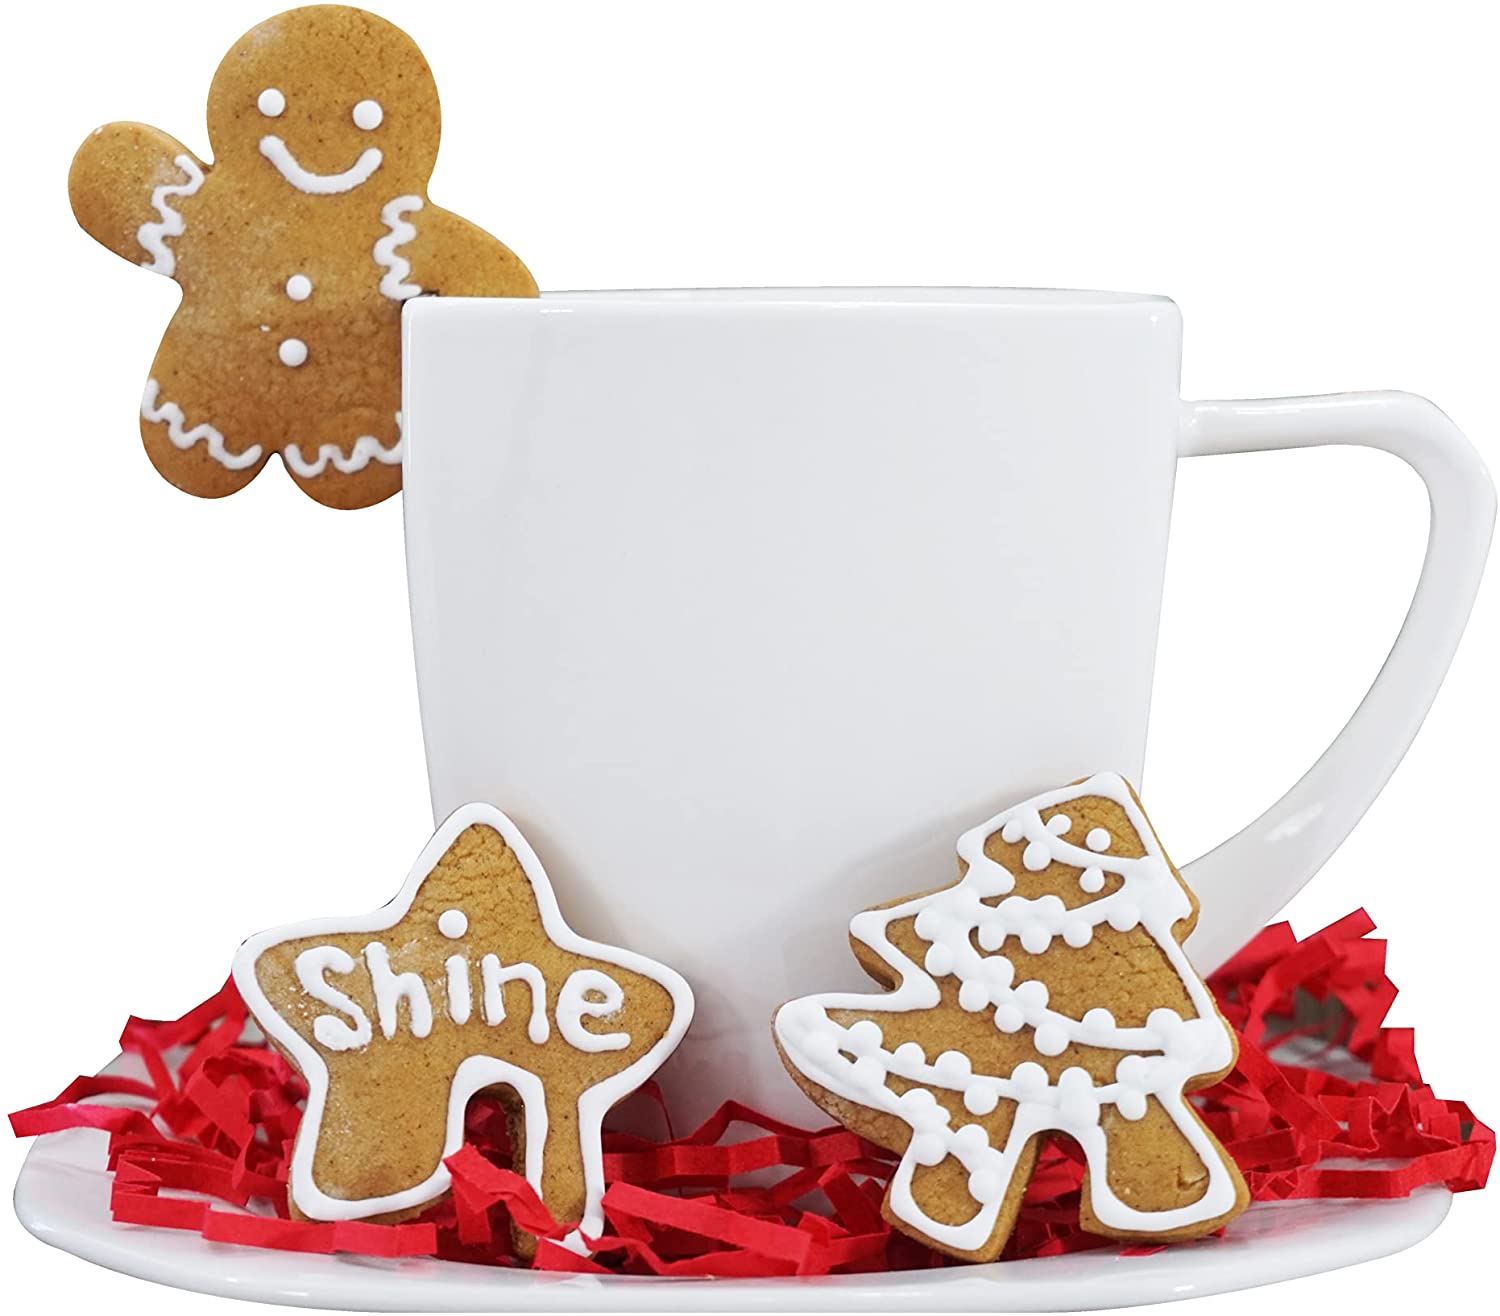 2 cookies set next to a white mug and a gingerbread man cookie hanging over the edge of the mug.